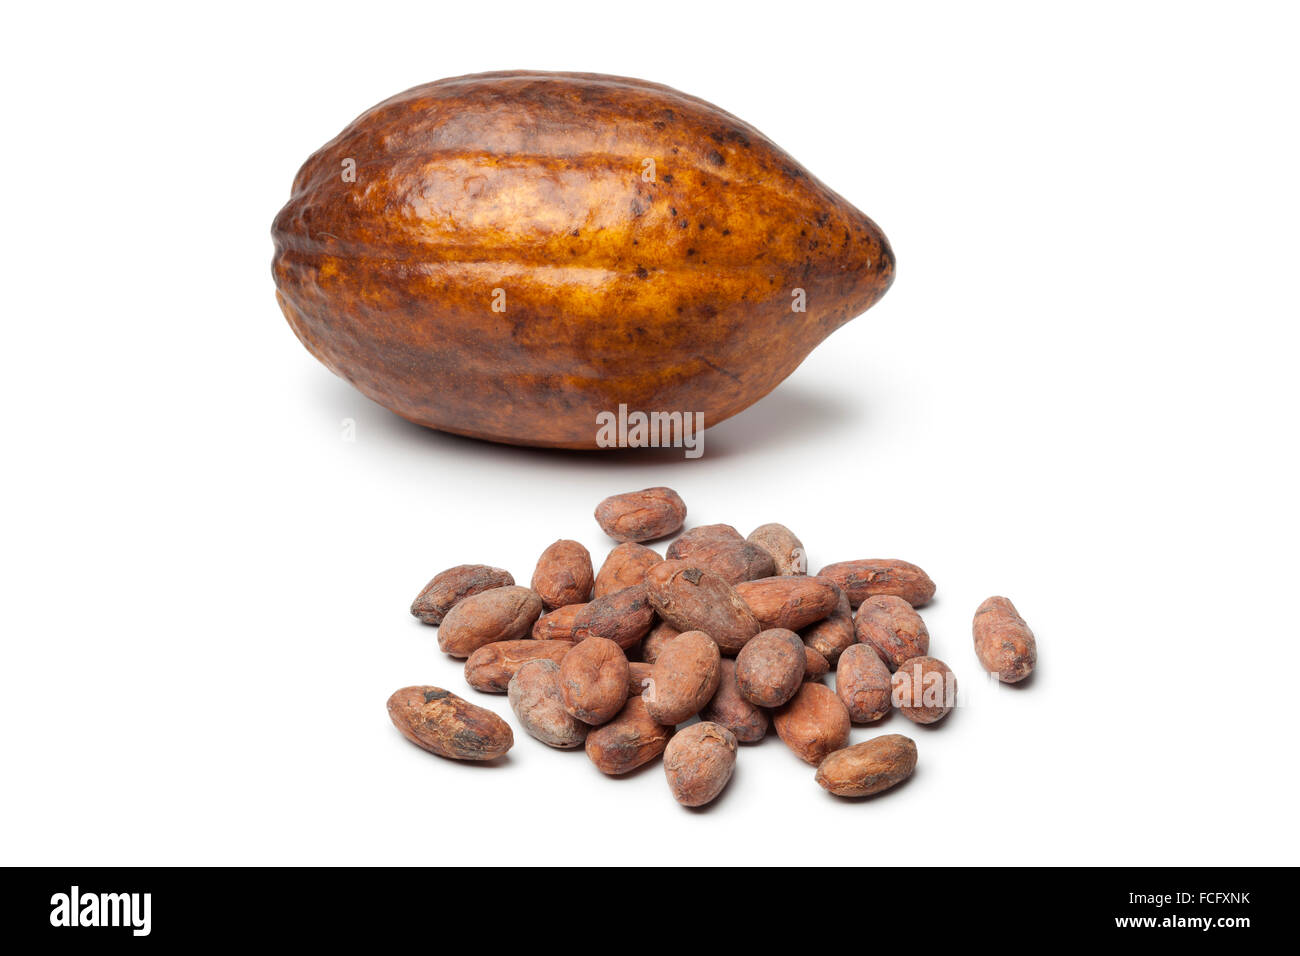 Cacao fruit and cocao beans on white background Stock Photo